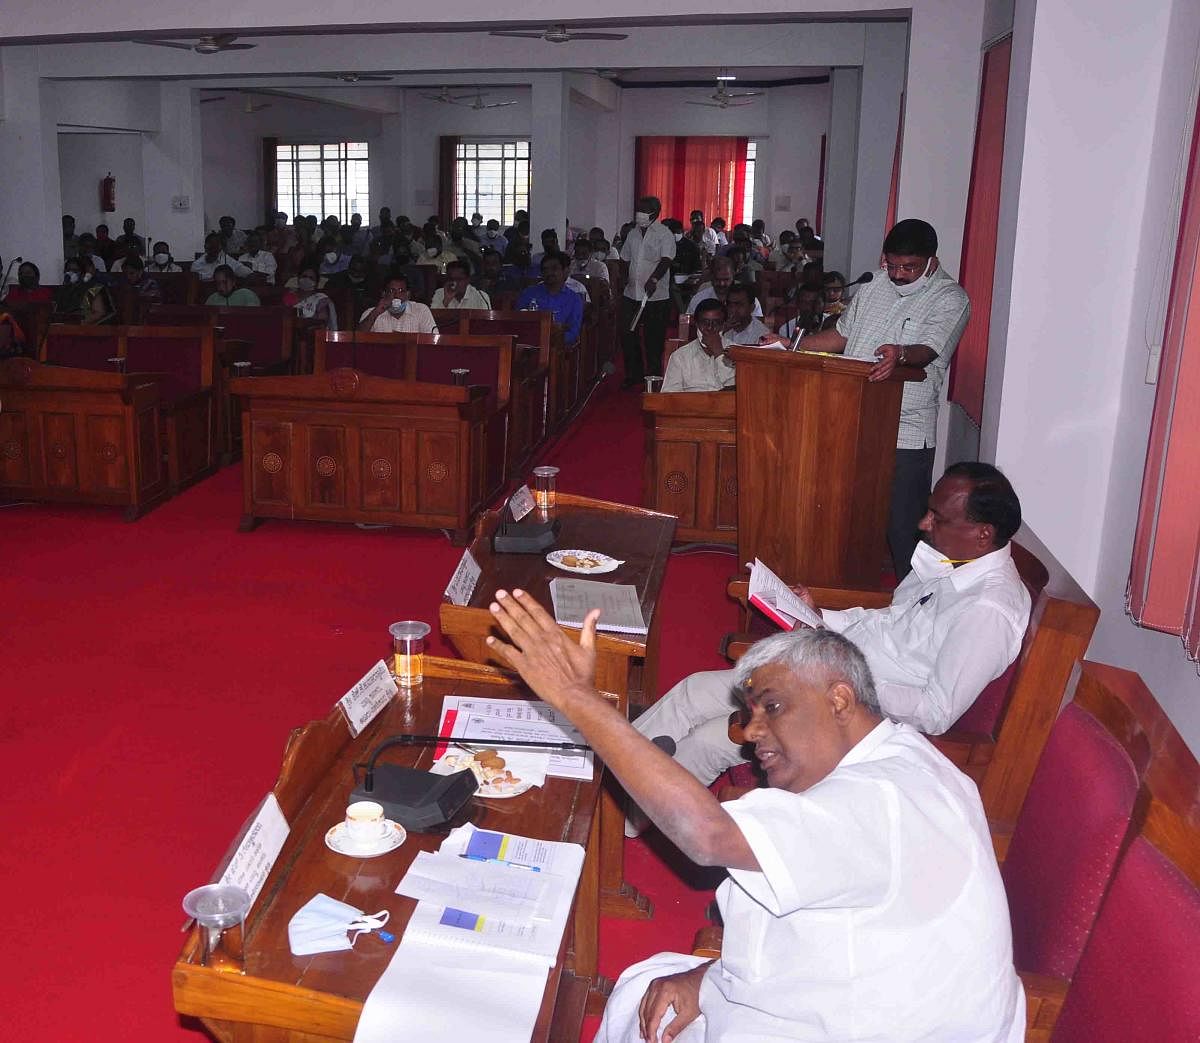 MLA H D Revanna speaks at the DISHA meeting in Hassan on Wednesday. DH PHOTO